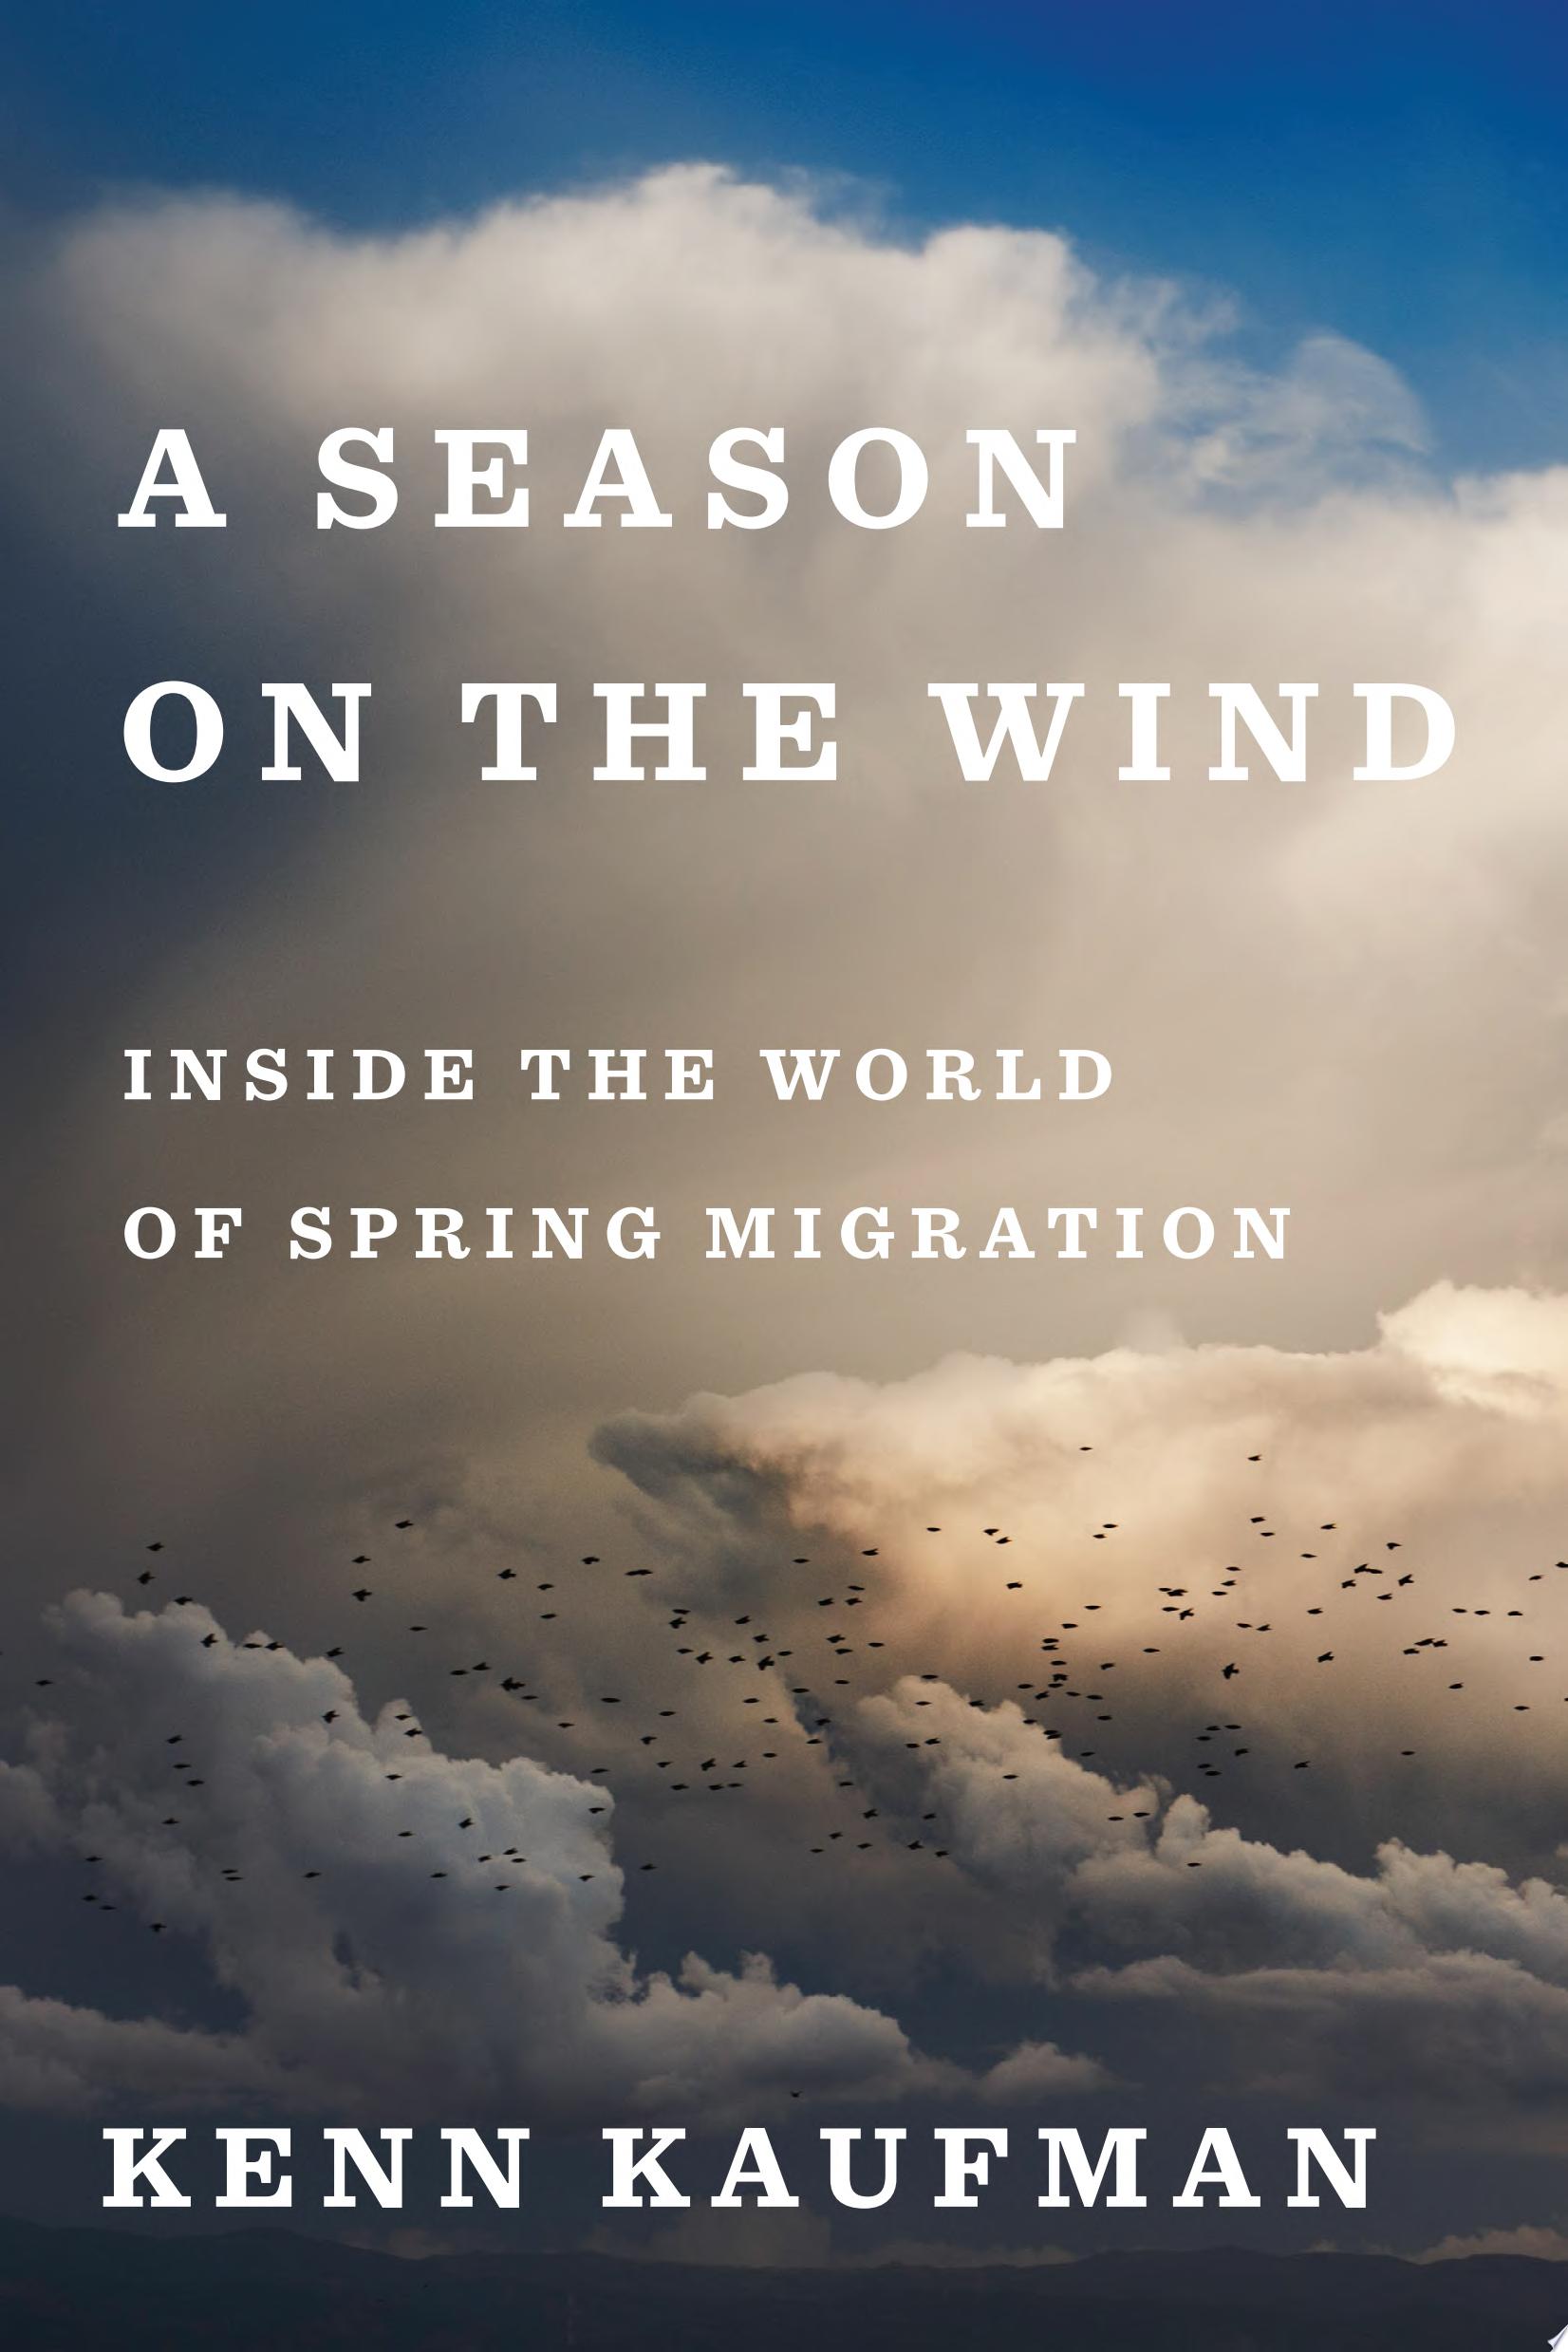 Image for "A Season on the Wind"